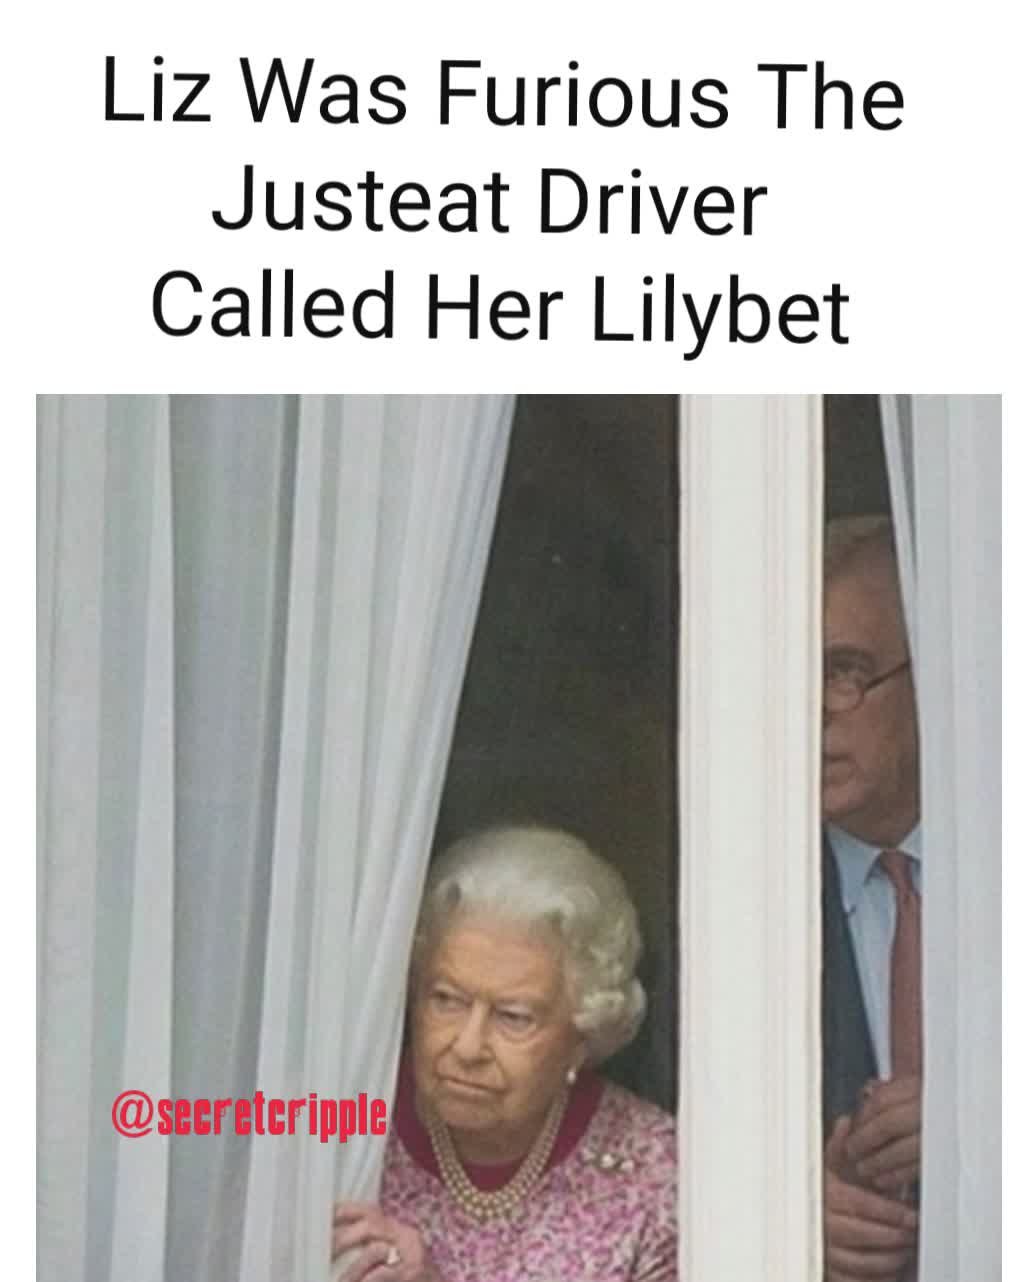 @secretcripple Liz Was Furious The Justeat Driver 
Called Her Lilybet